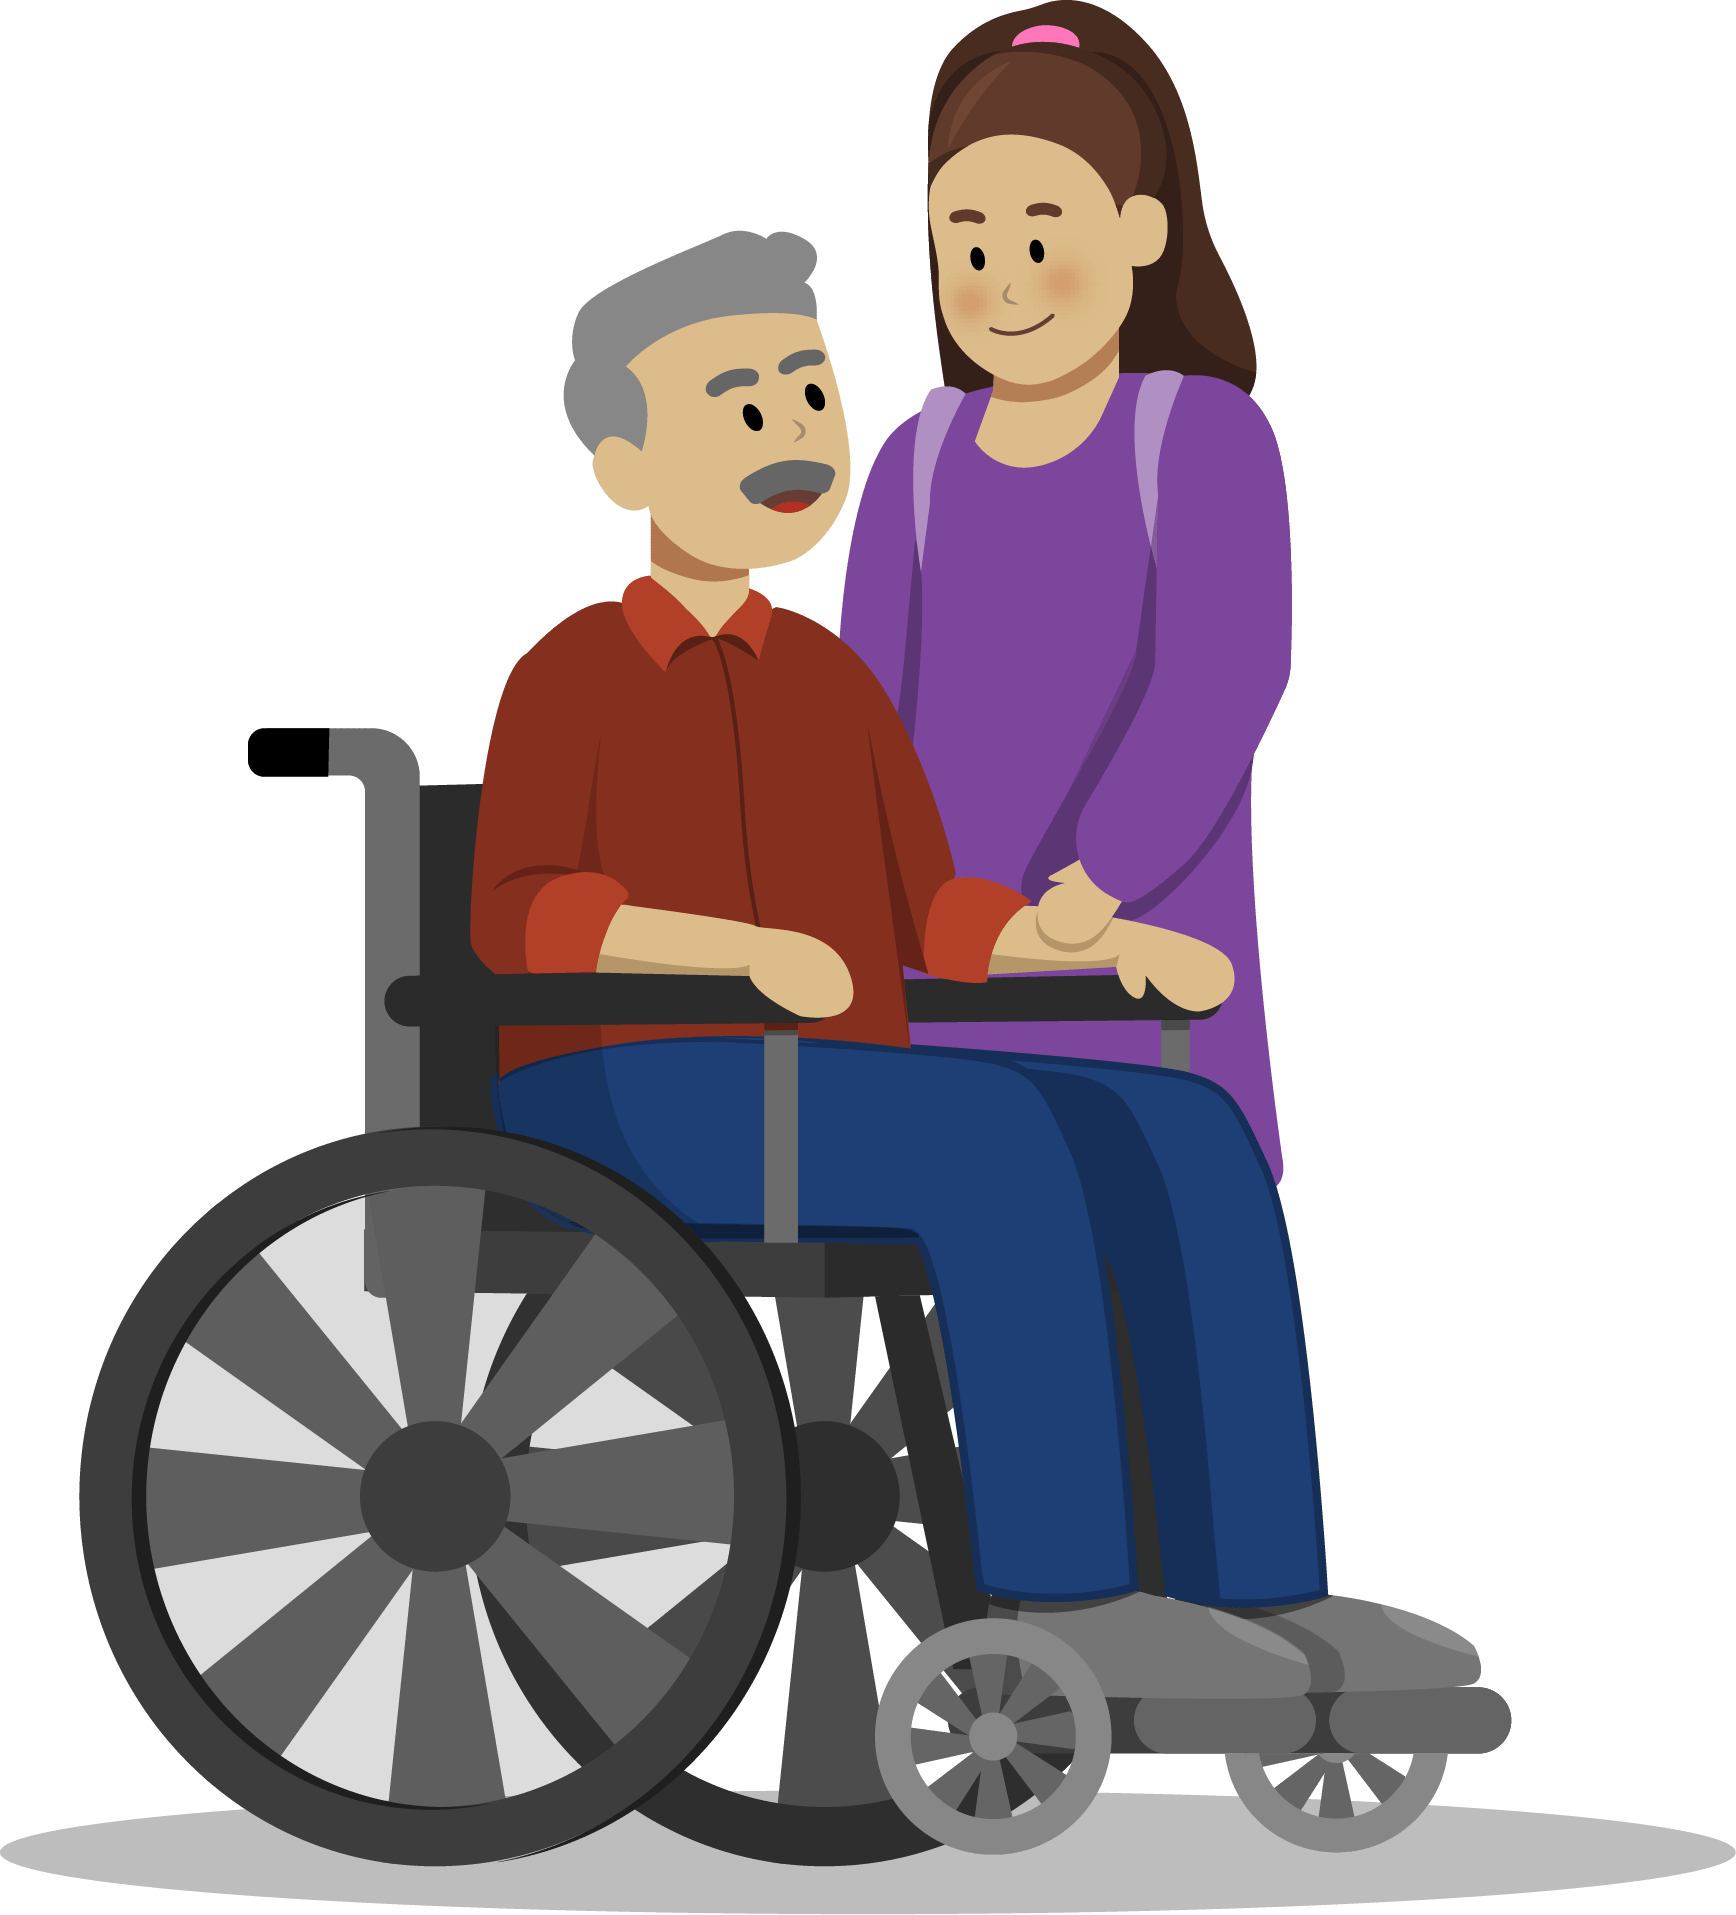 Illustration of a young carer for a man in a wheelchair